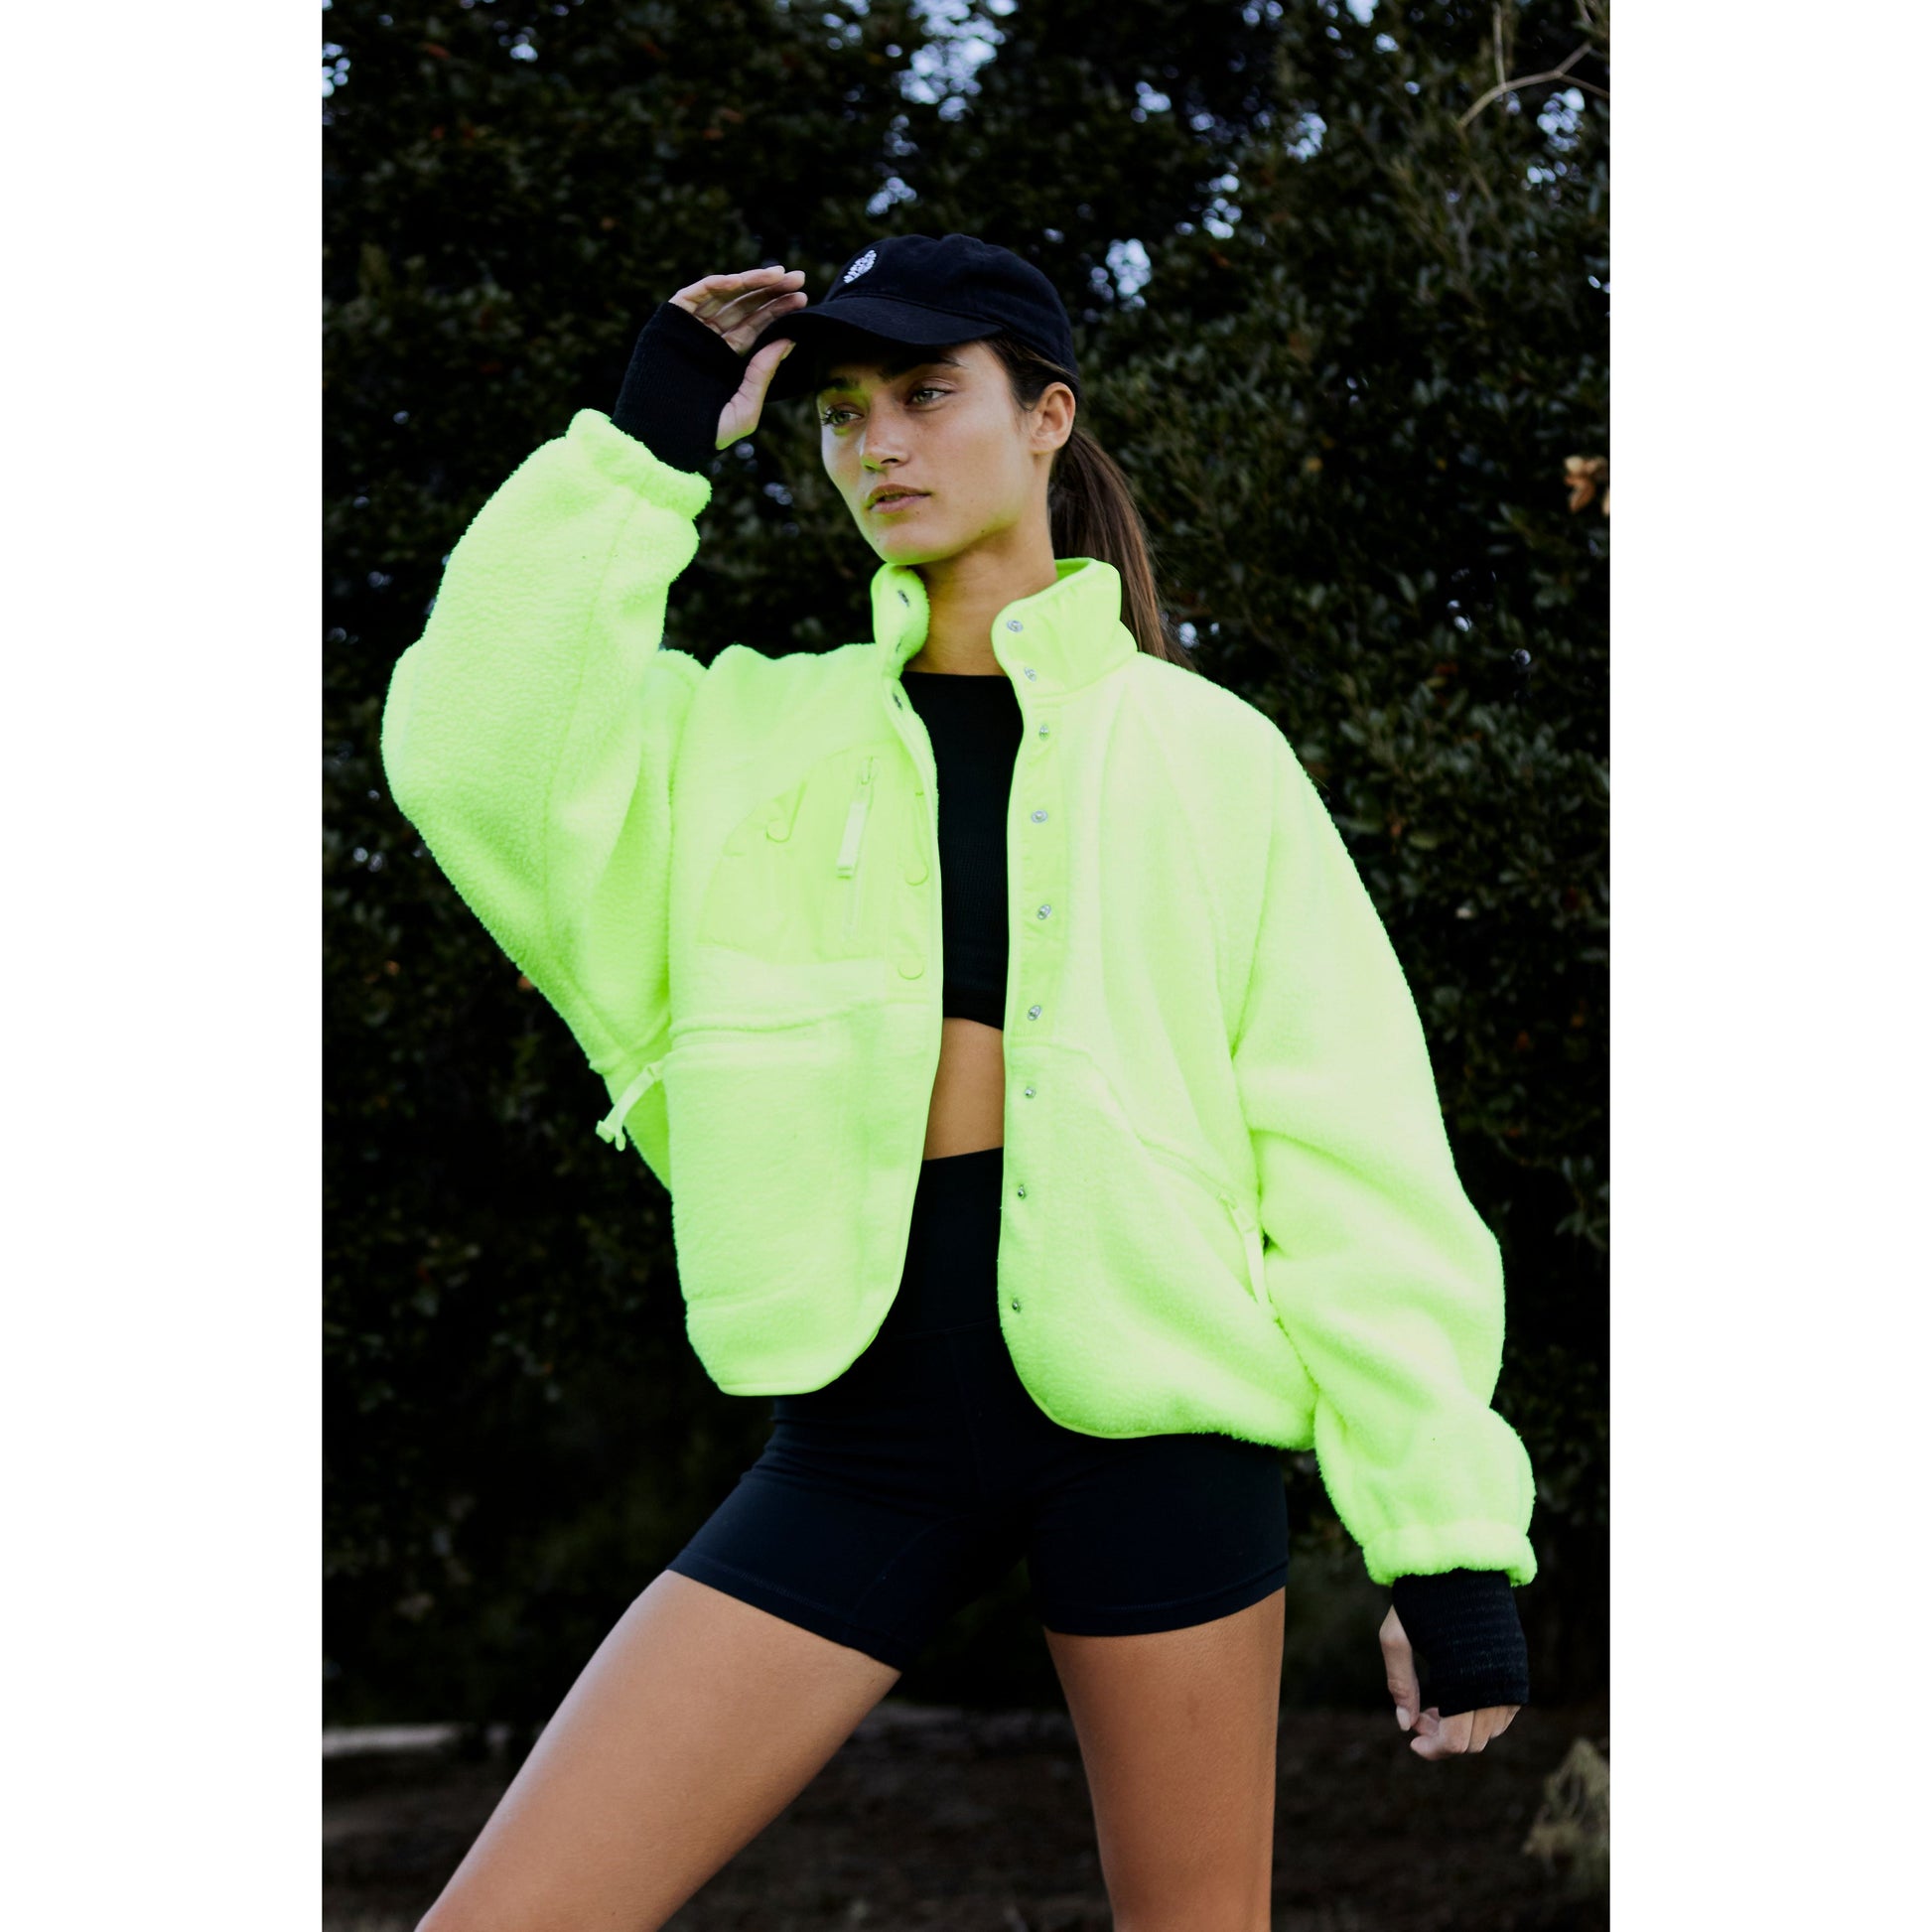 A woman in a Free People Movement Hit The Slopes Jacket in Highlighter and black cap stands outdoors, shading her eyes with one hand, with trees in the background.